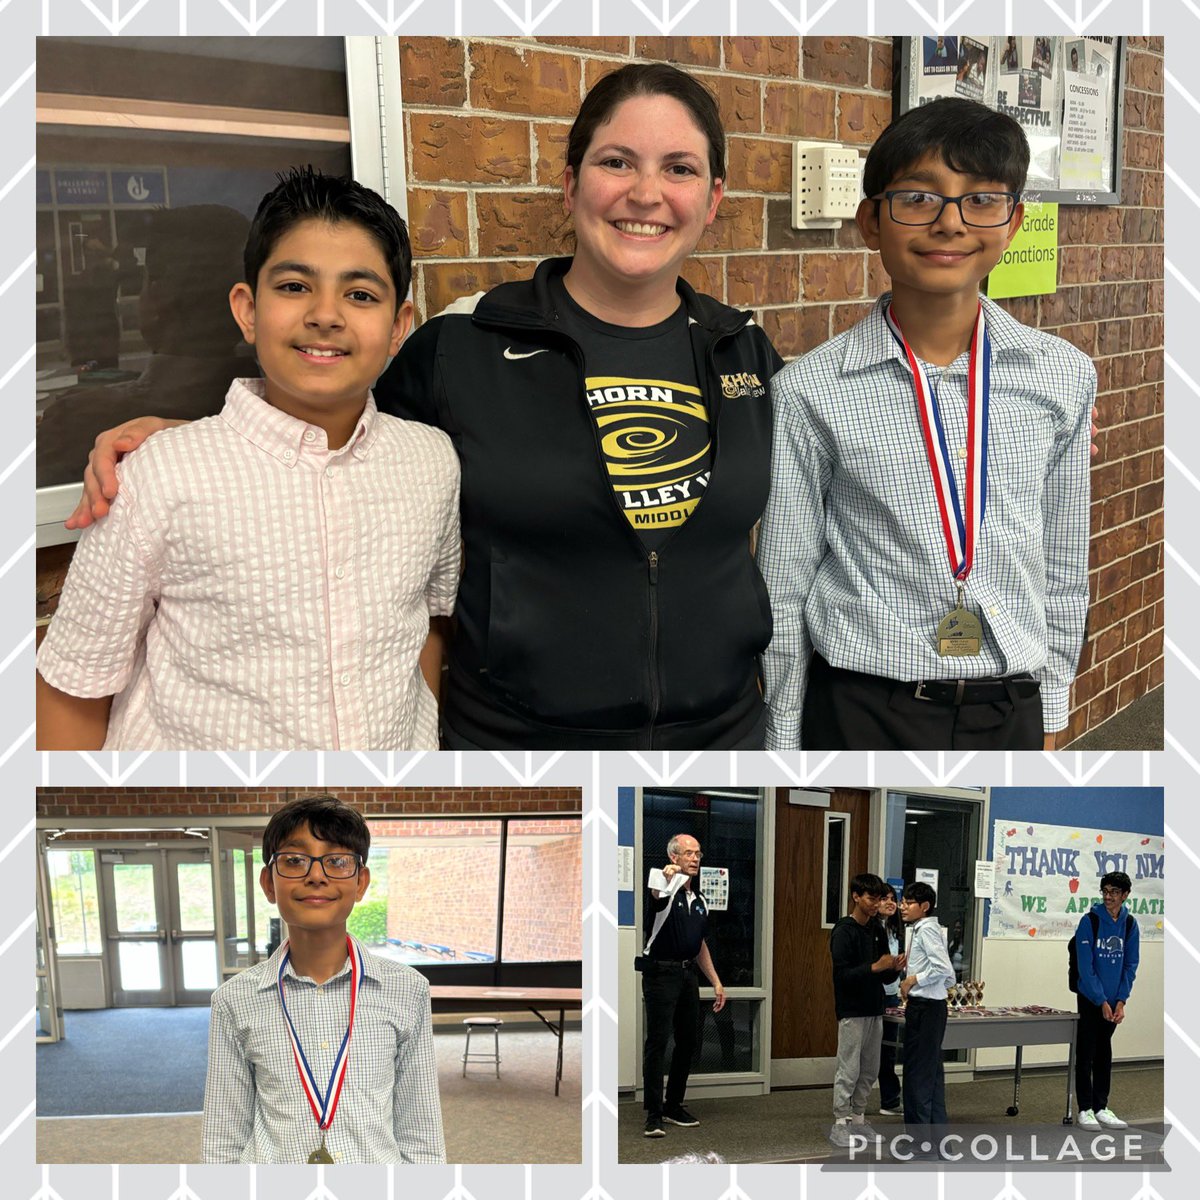 The EVV Debate Team traveled to the Millard North Middle School Debate Tournament this weekend where 6th grader, Ray, received the Most Enthusiastic Novice Debate Award. Congratulations, Ray and the rest of the Debate Team! #WhatWeDoAtValleyView #EPSAchieves